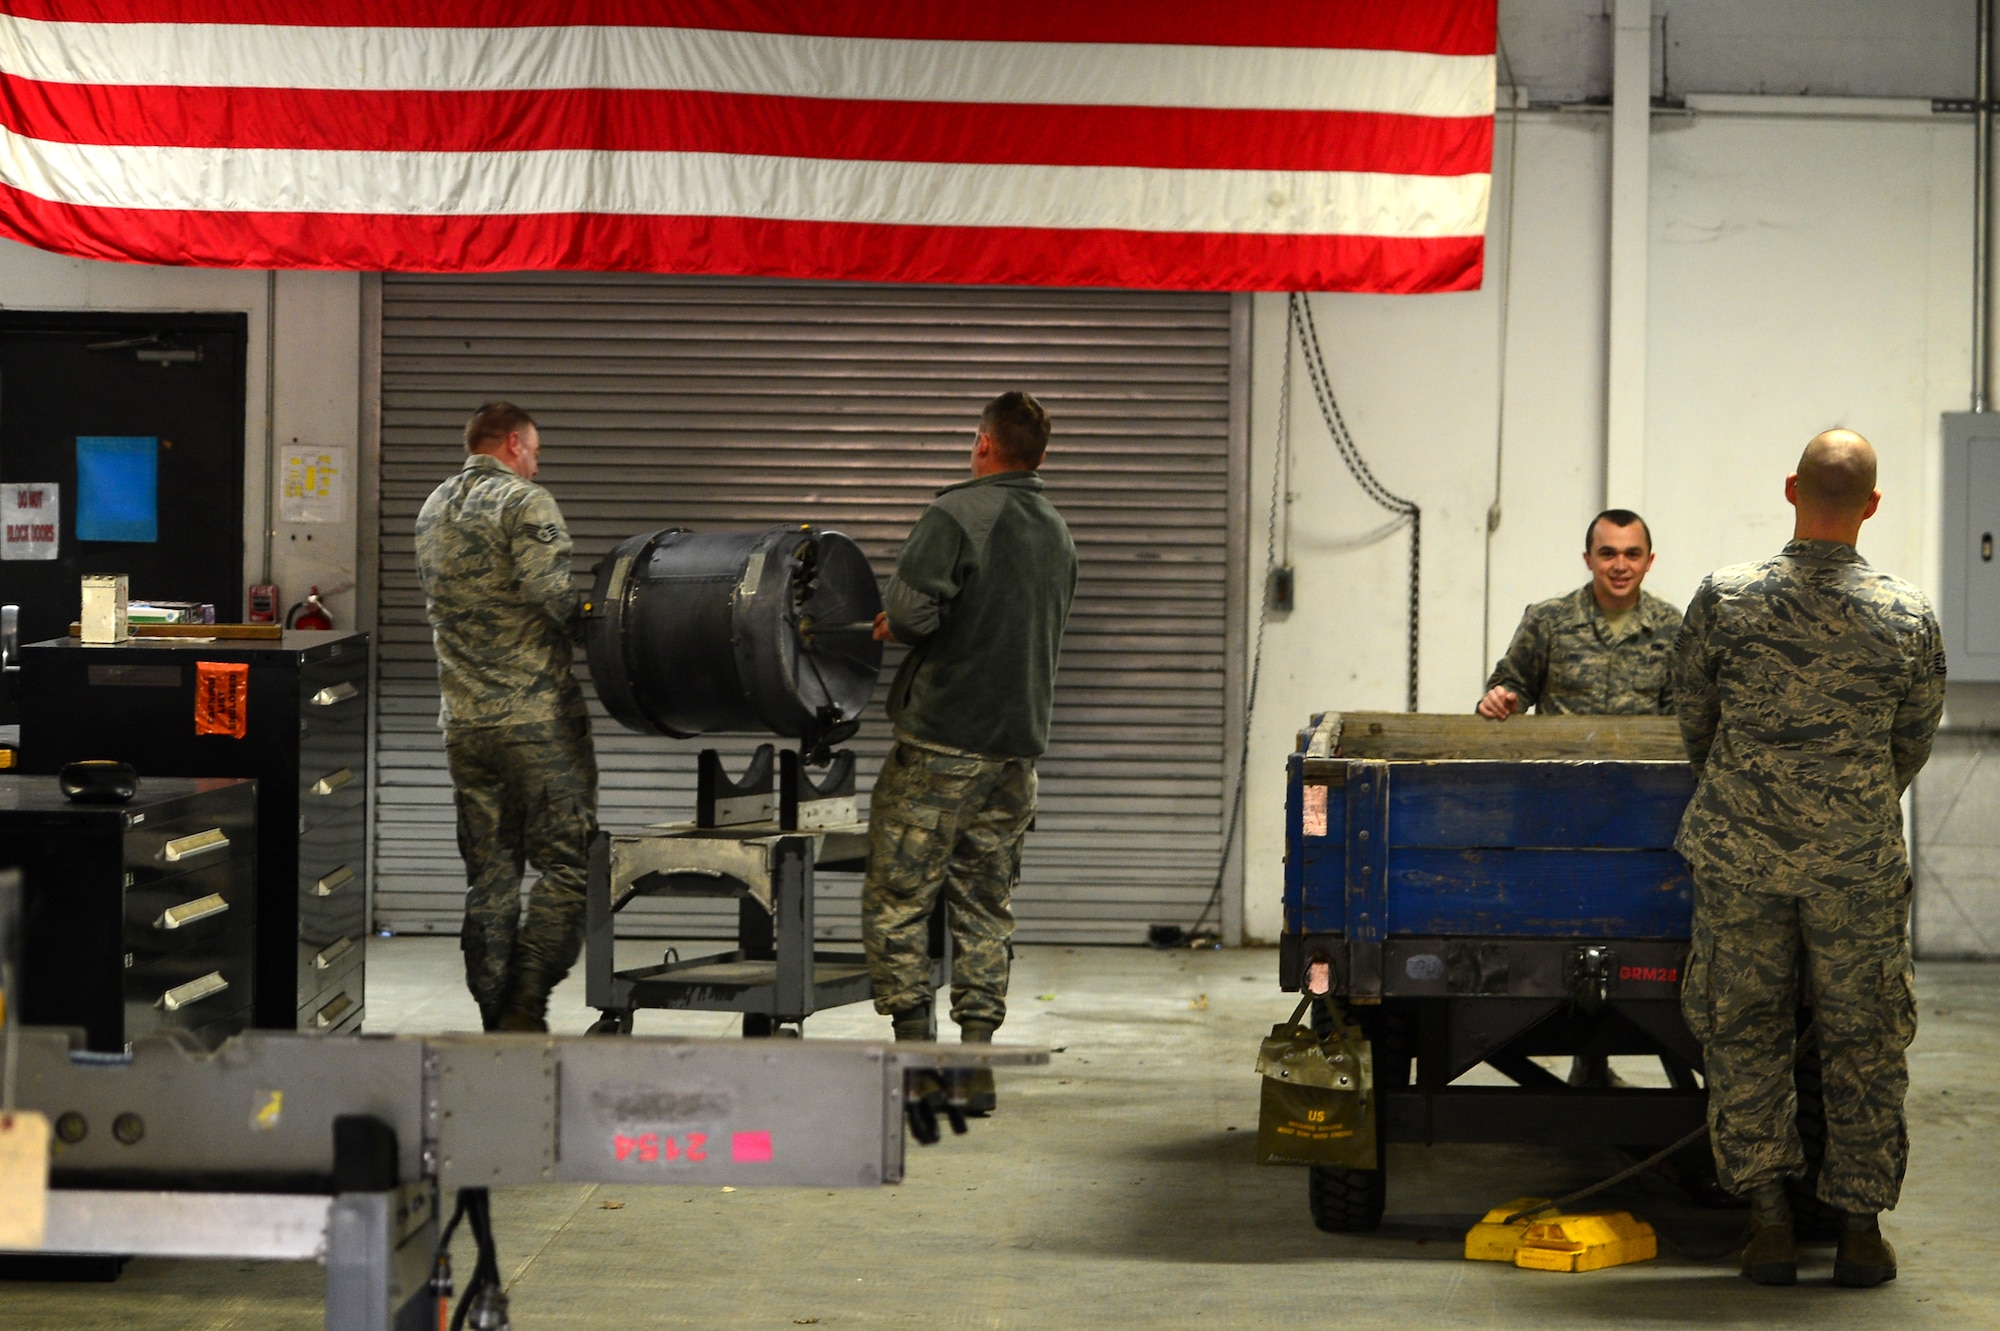 U.S. Airmen assigned to the 20th Equipment Maintenance Squadron aircraft armament flight load parts of an M-61A1 20 mm multi-barrel cannon onto an inspection platform at Shaw Air Force Base, S.C., March 29, 2017. The cannon being inspected is comprised of six barrels and is tested for operations security before being installed onto an F-16CM Fighting Falcon. (U.S. Air Force photo by Airman 1st Class Christopher Maldonado)